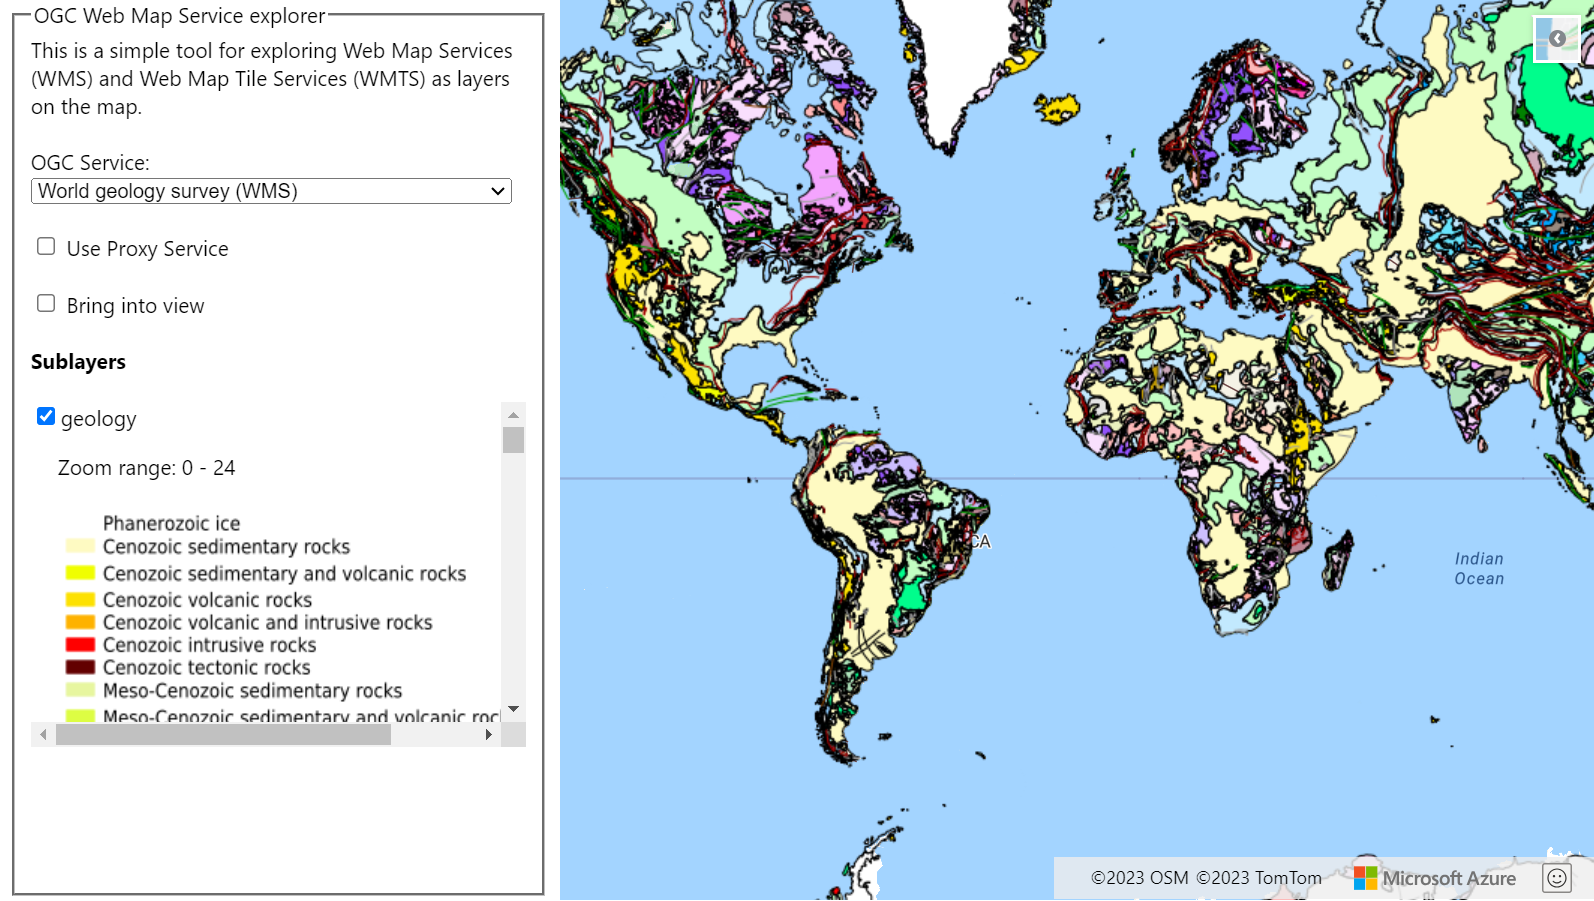 A screenshot that shows a map with a WMTS layer that comes from the world geology survey. Left of the map is a drop-down list showing the OGC services that can be selected.